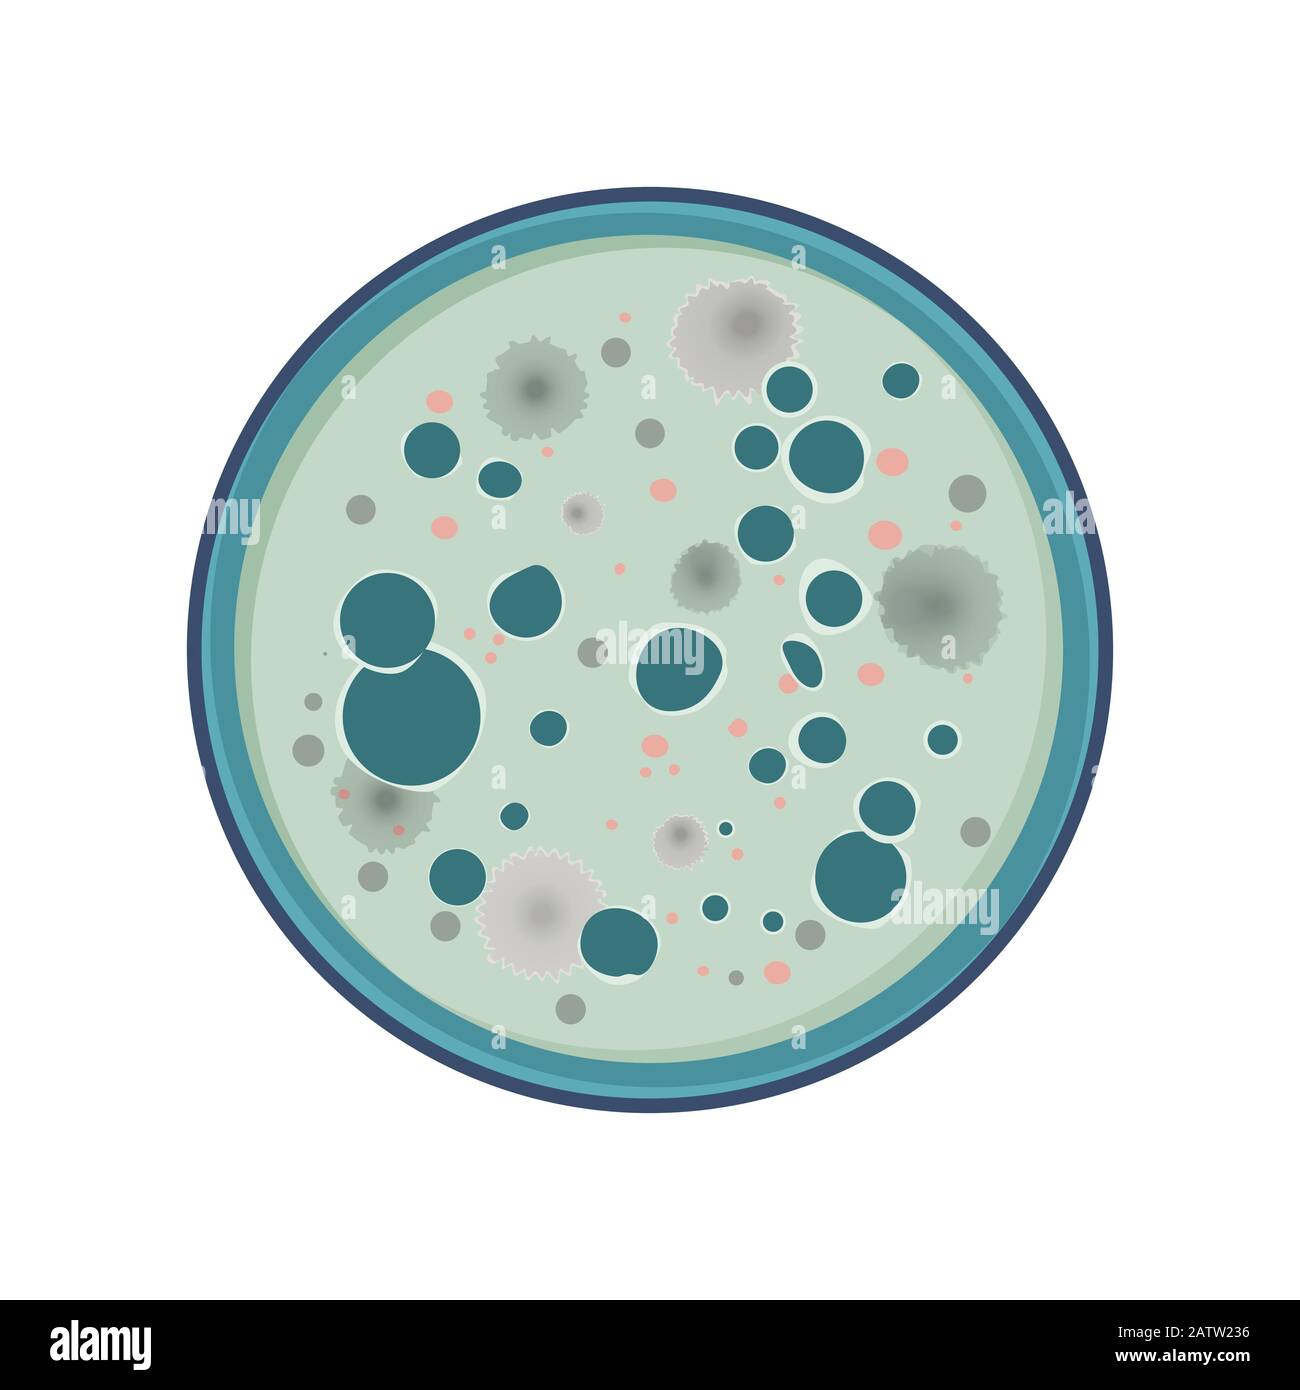 Colony of bacteria, fungus growth in petry dish, flat style, vector illustration. Stock Vector